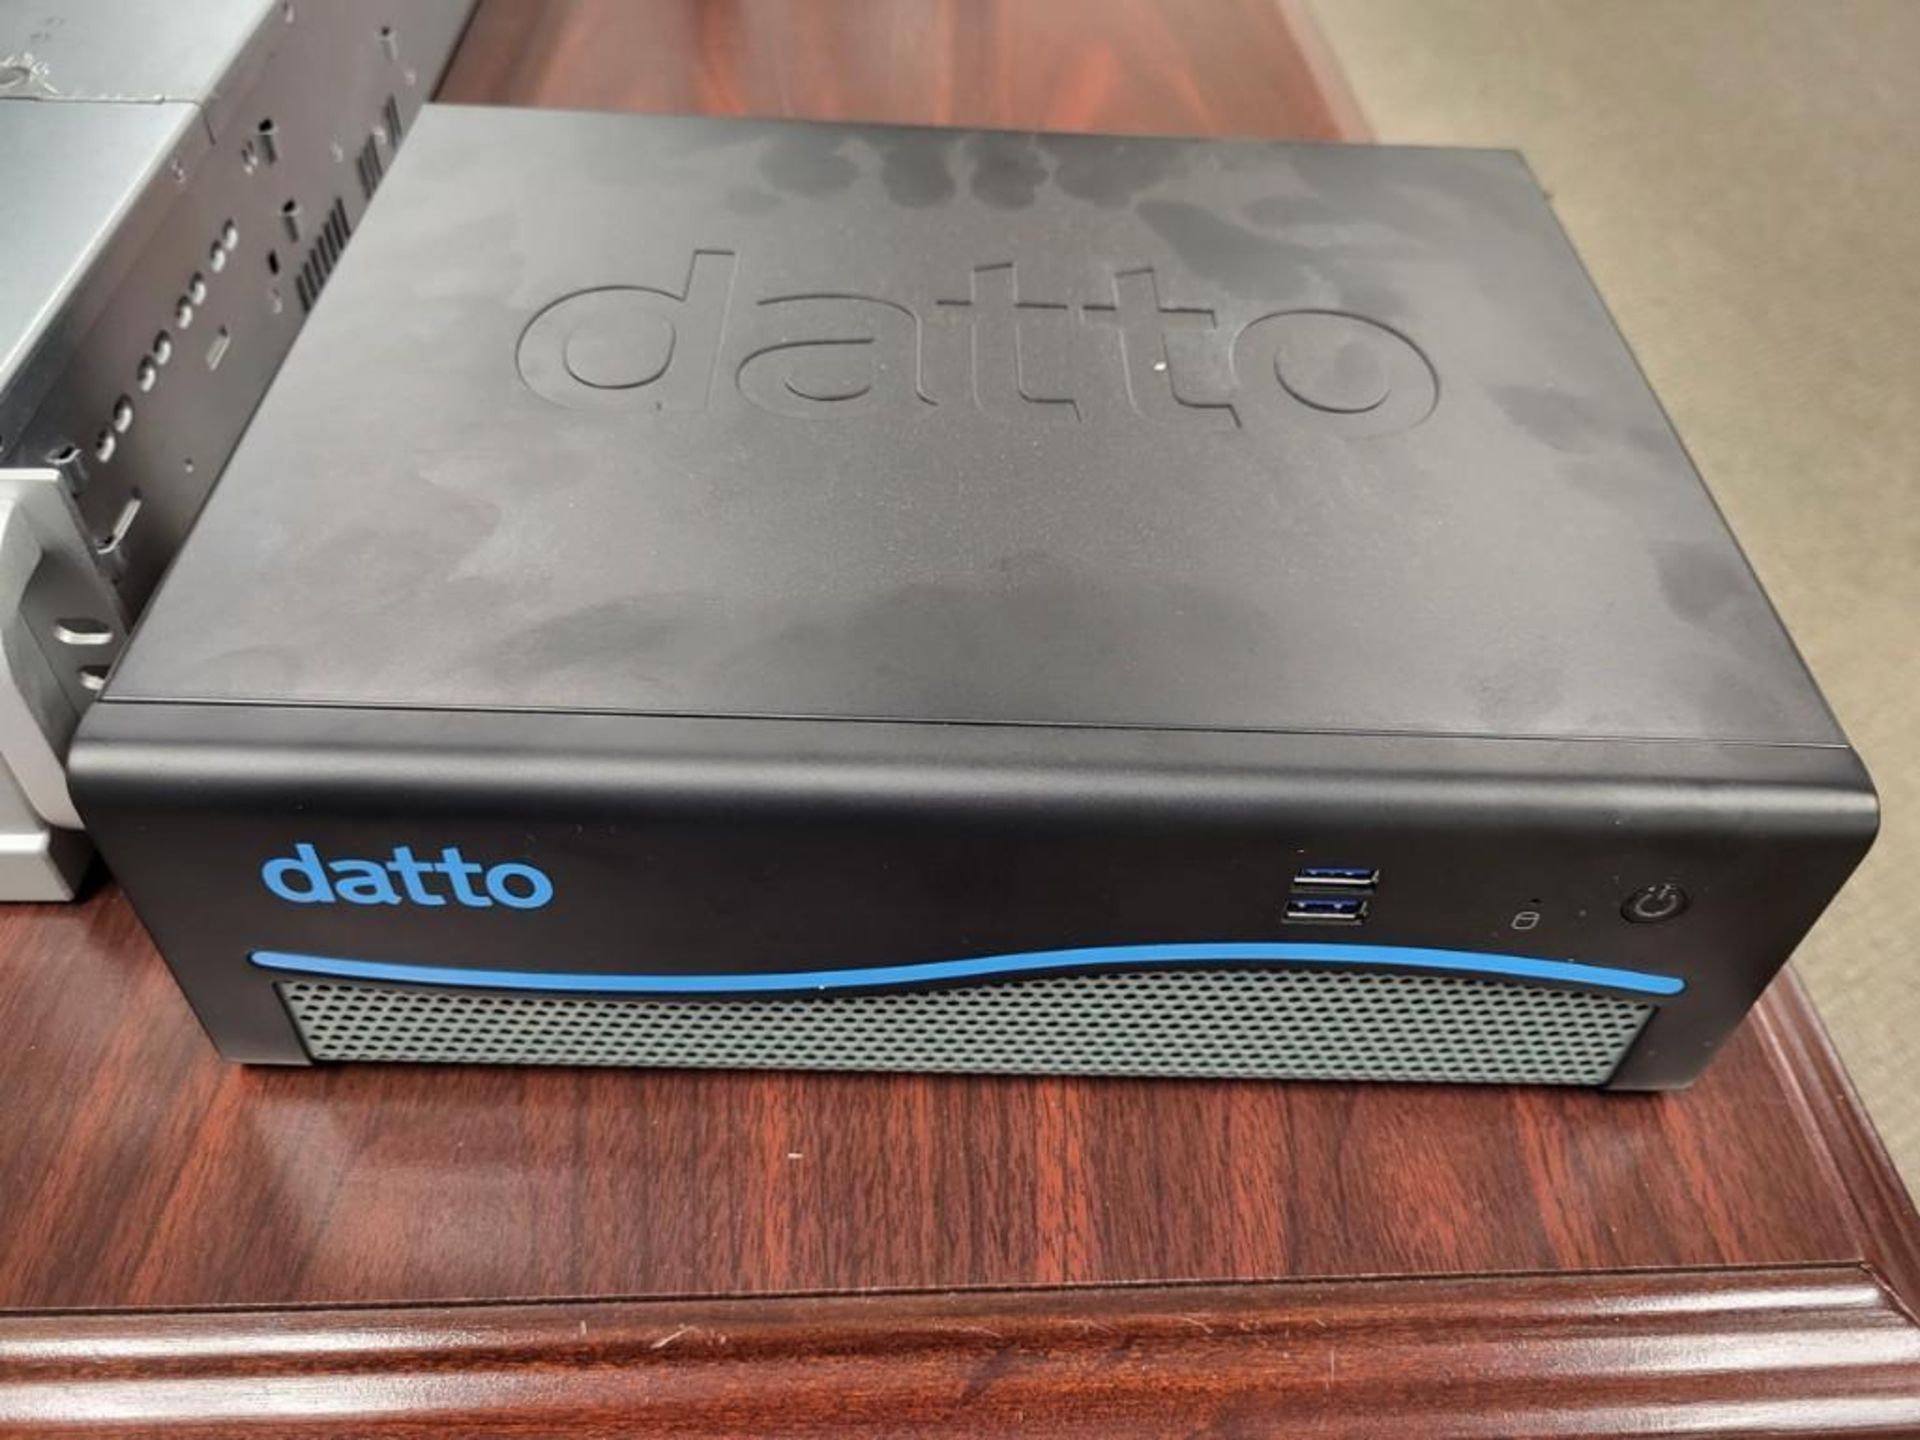 Datto model SP3000 Server and Data Storage Unit - Image 2 of 4